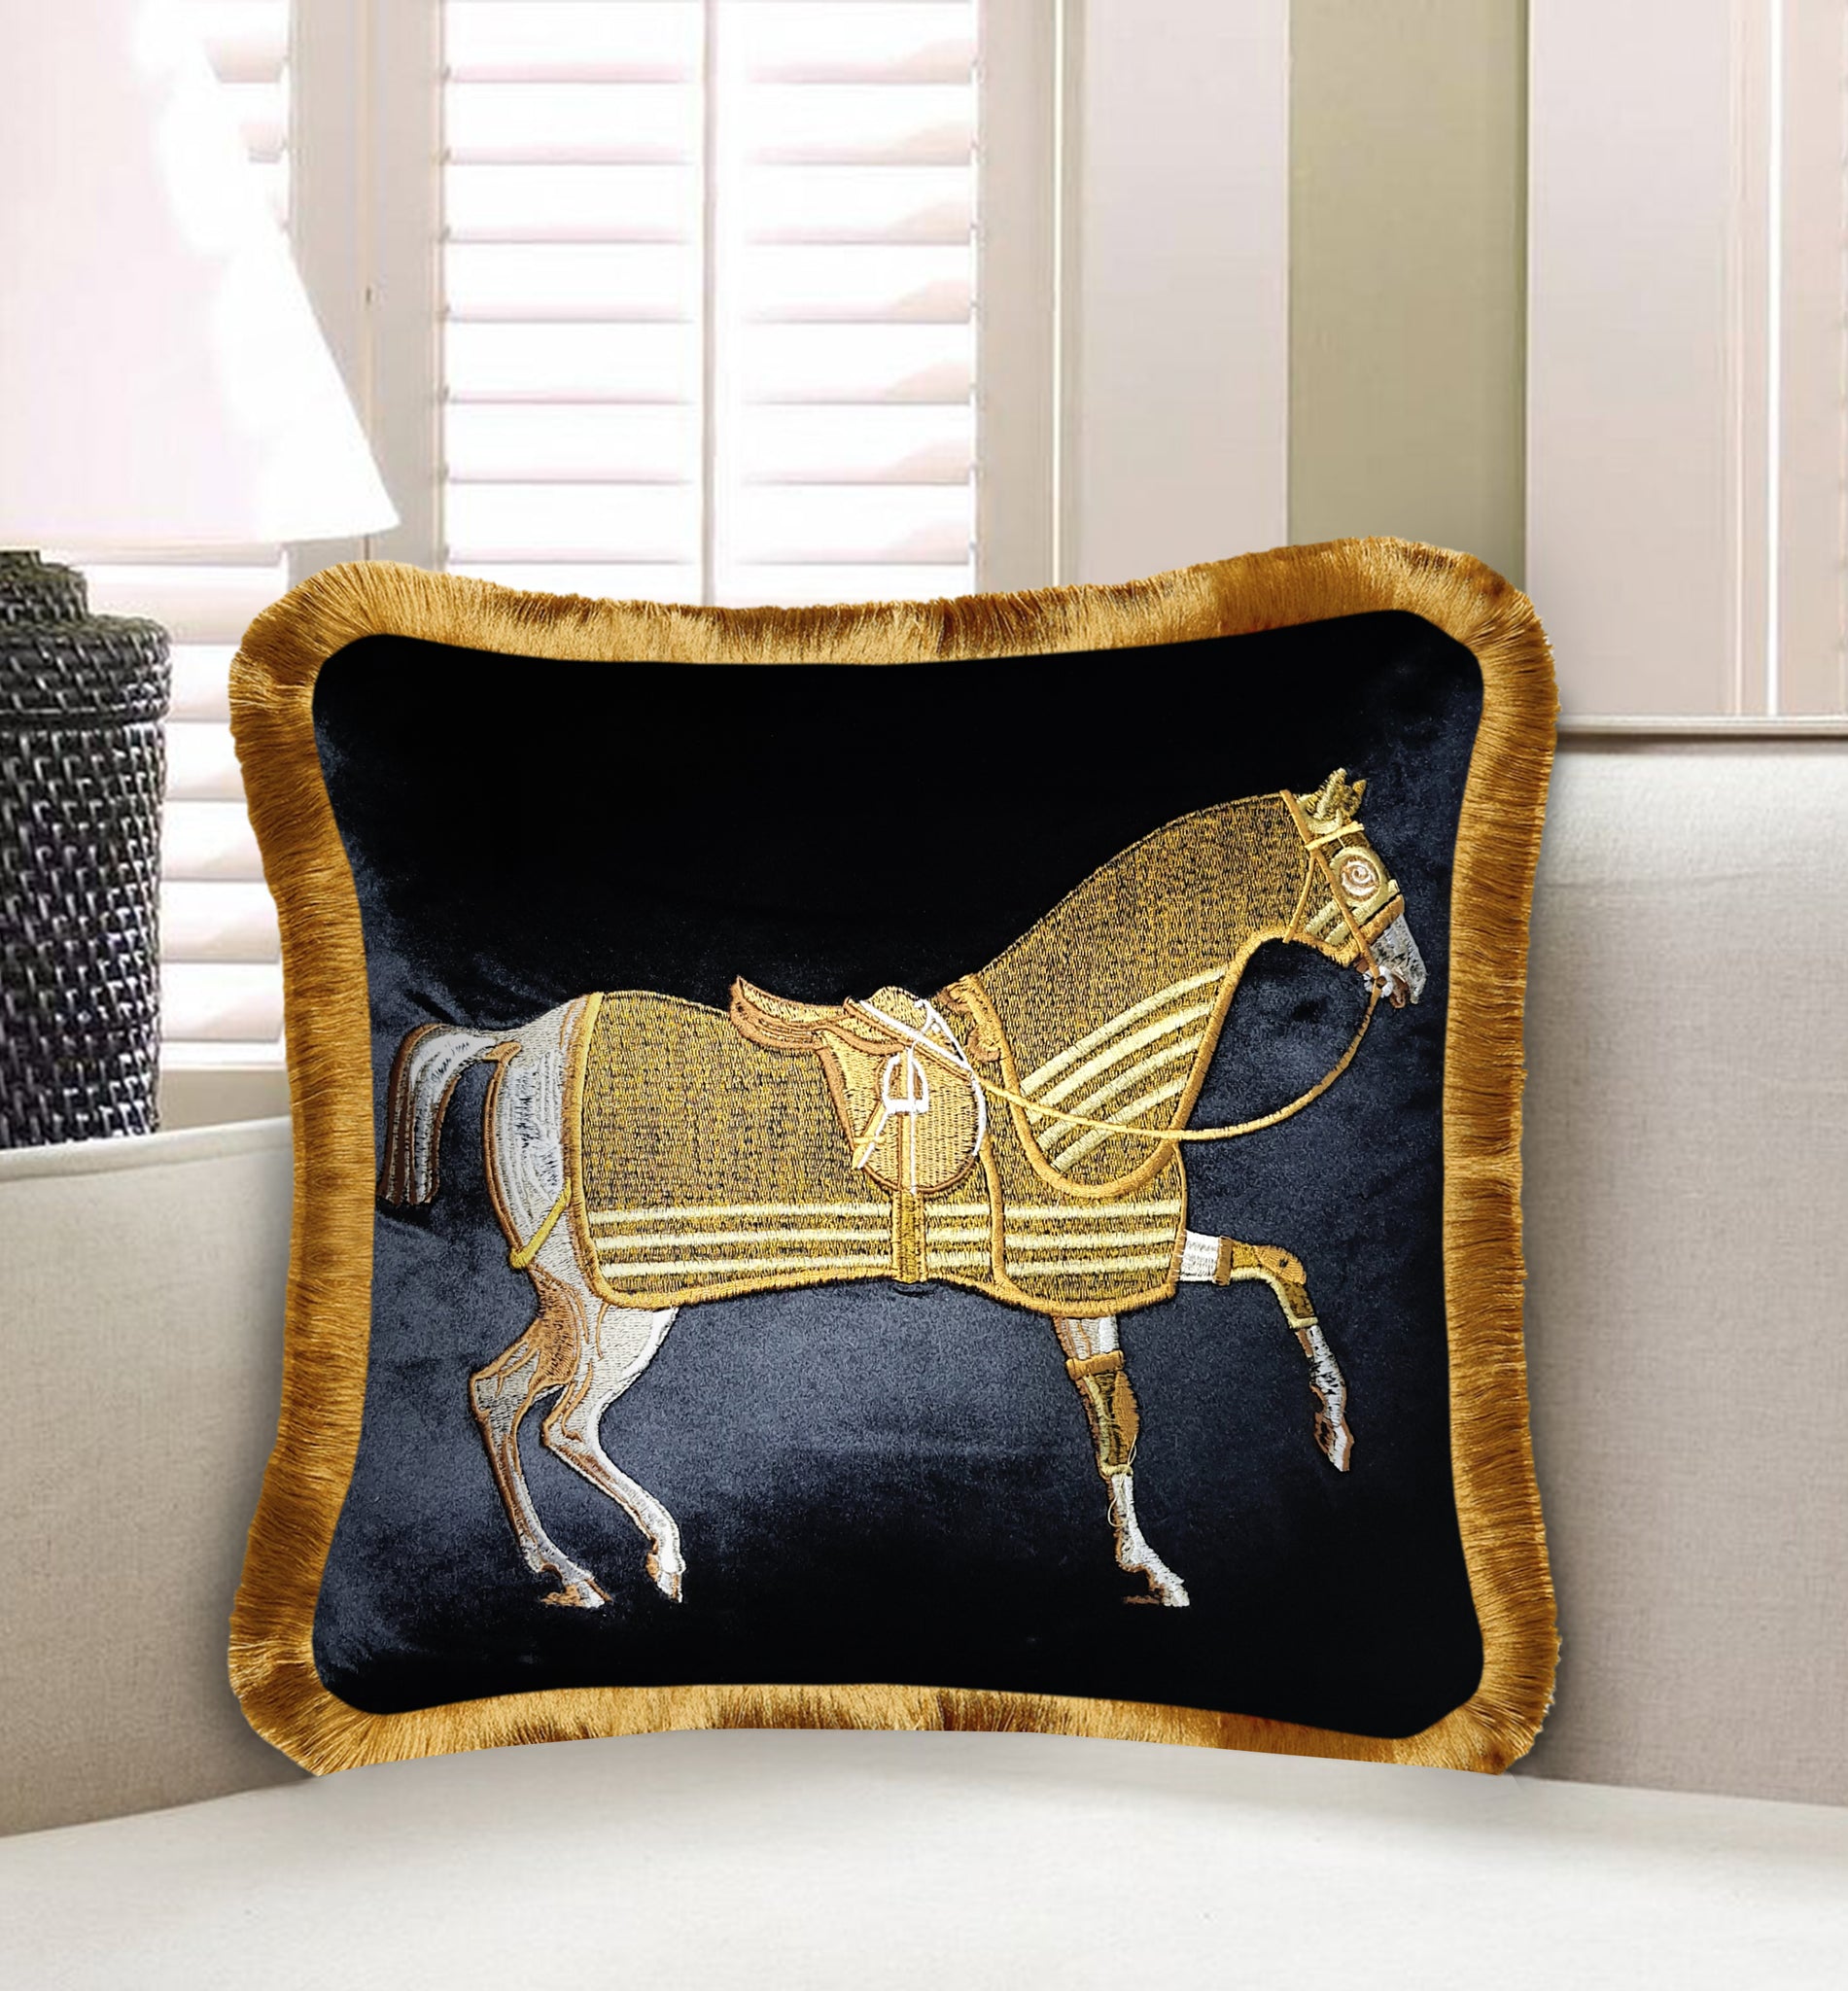 Beige Gold Luxury Classic Horse Embroidery Baroque Style Decorative Cushion Cover Pillow Case Home European Sofa Throw Pillow 45x45 cm 18x18 Inches